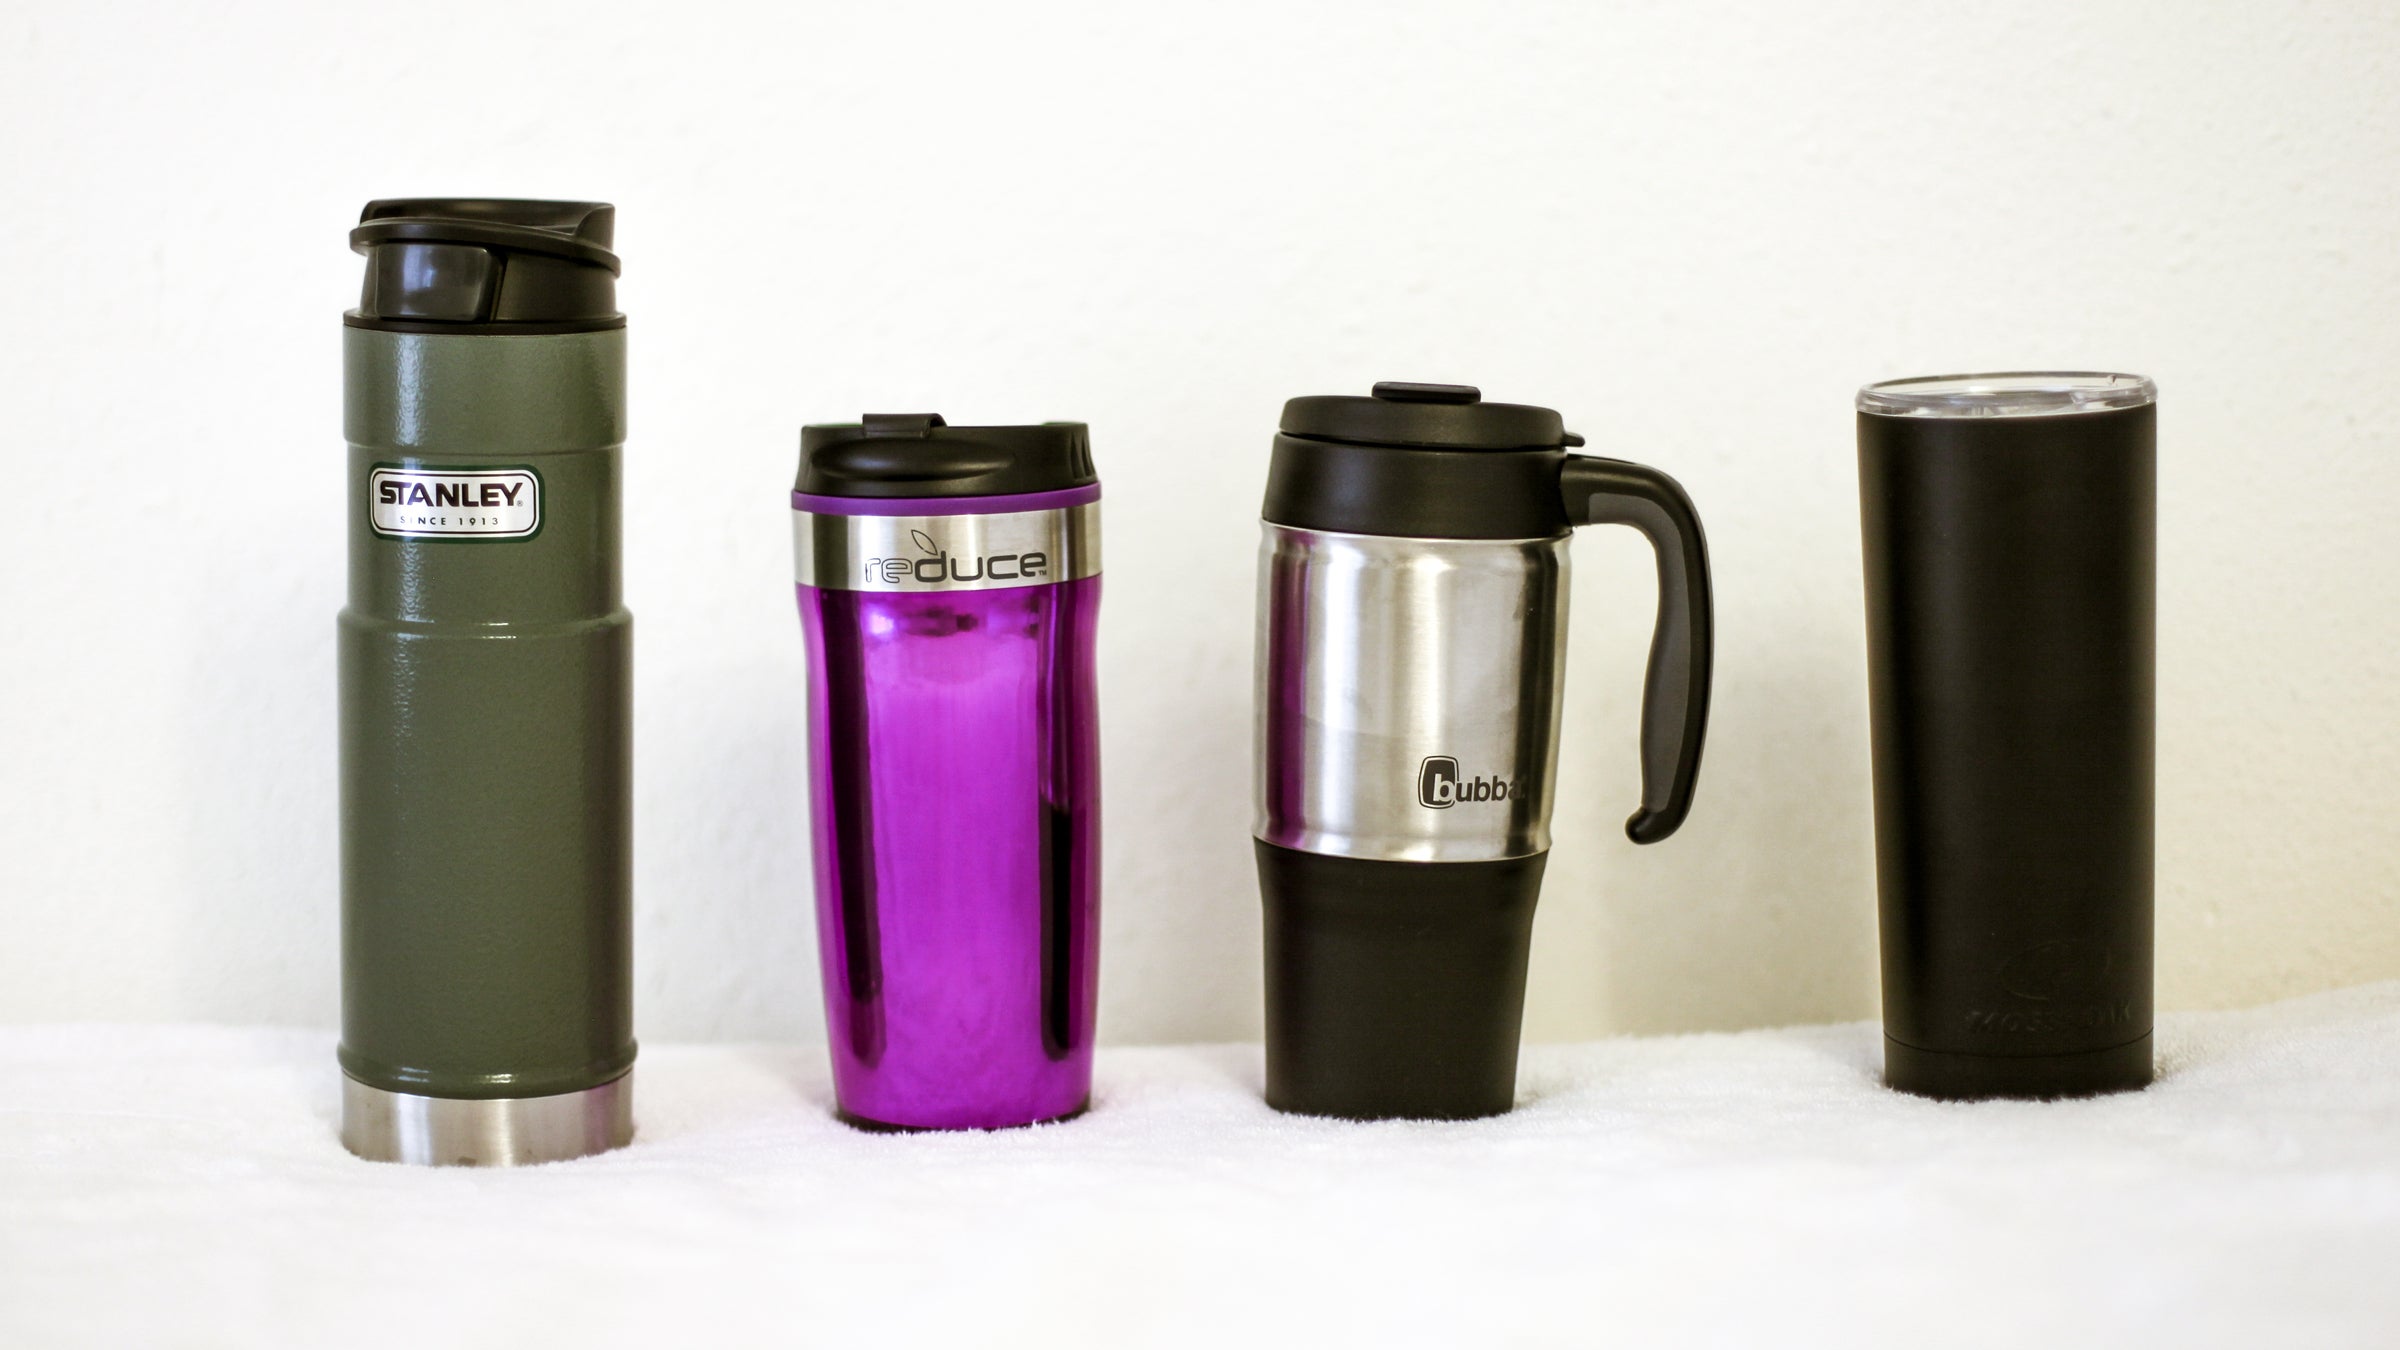 Are Expensive Insulated Coffee Mugs Worth the Money?